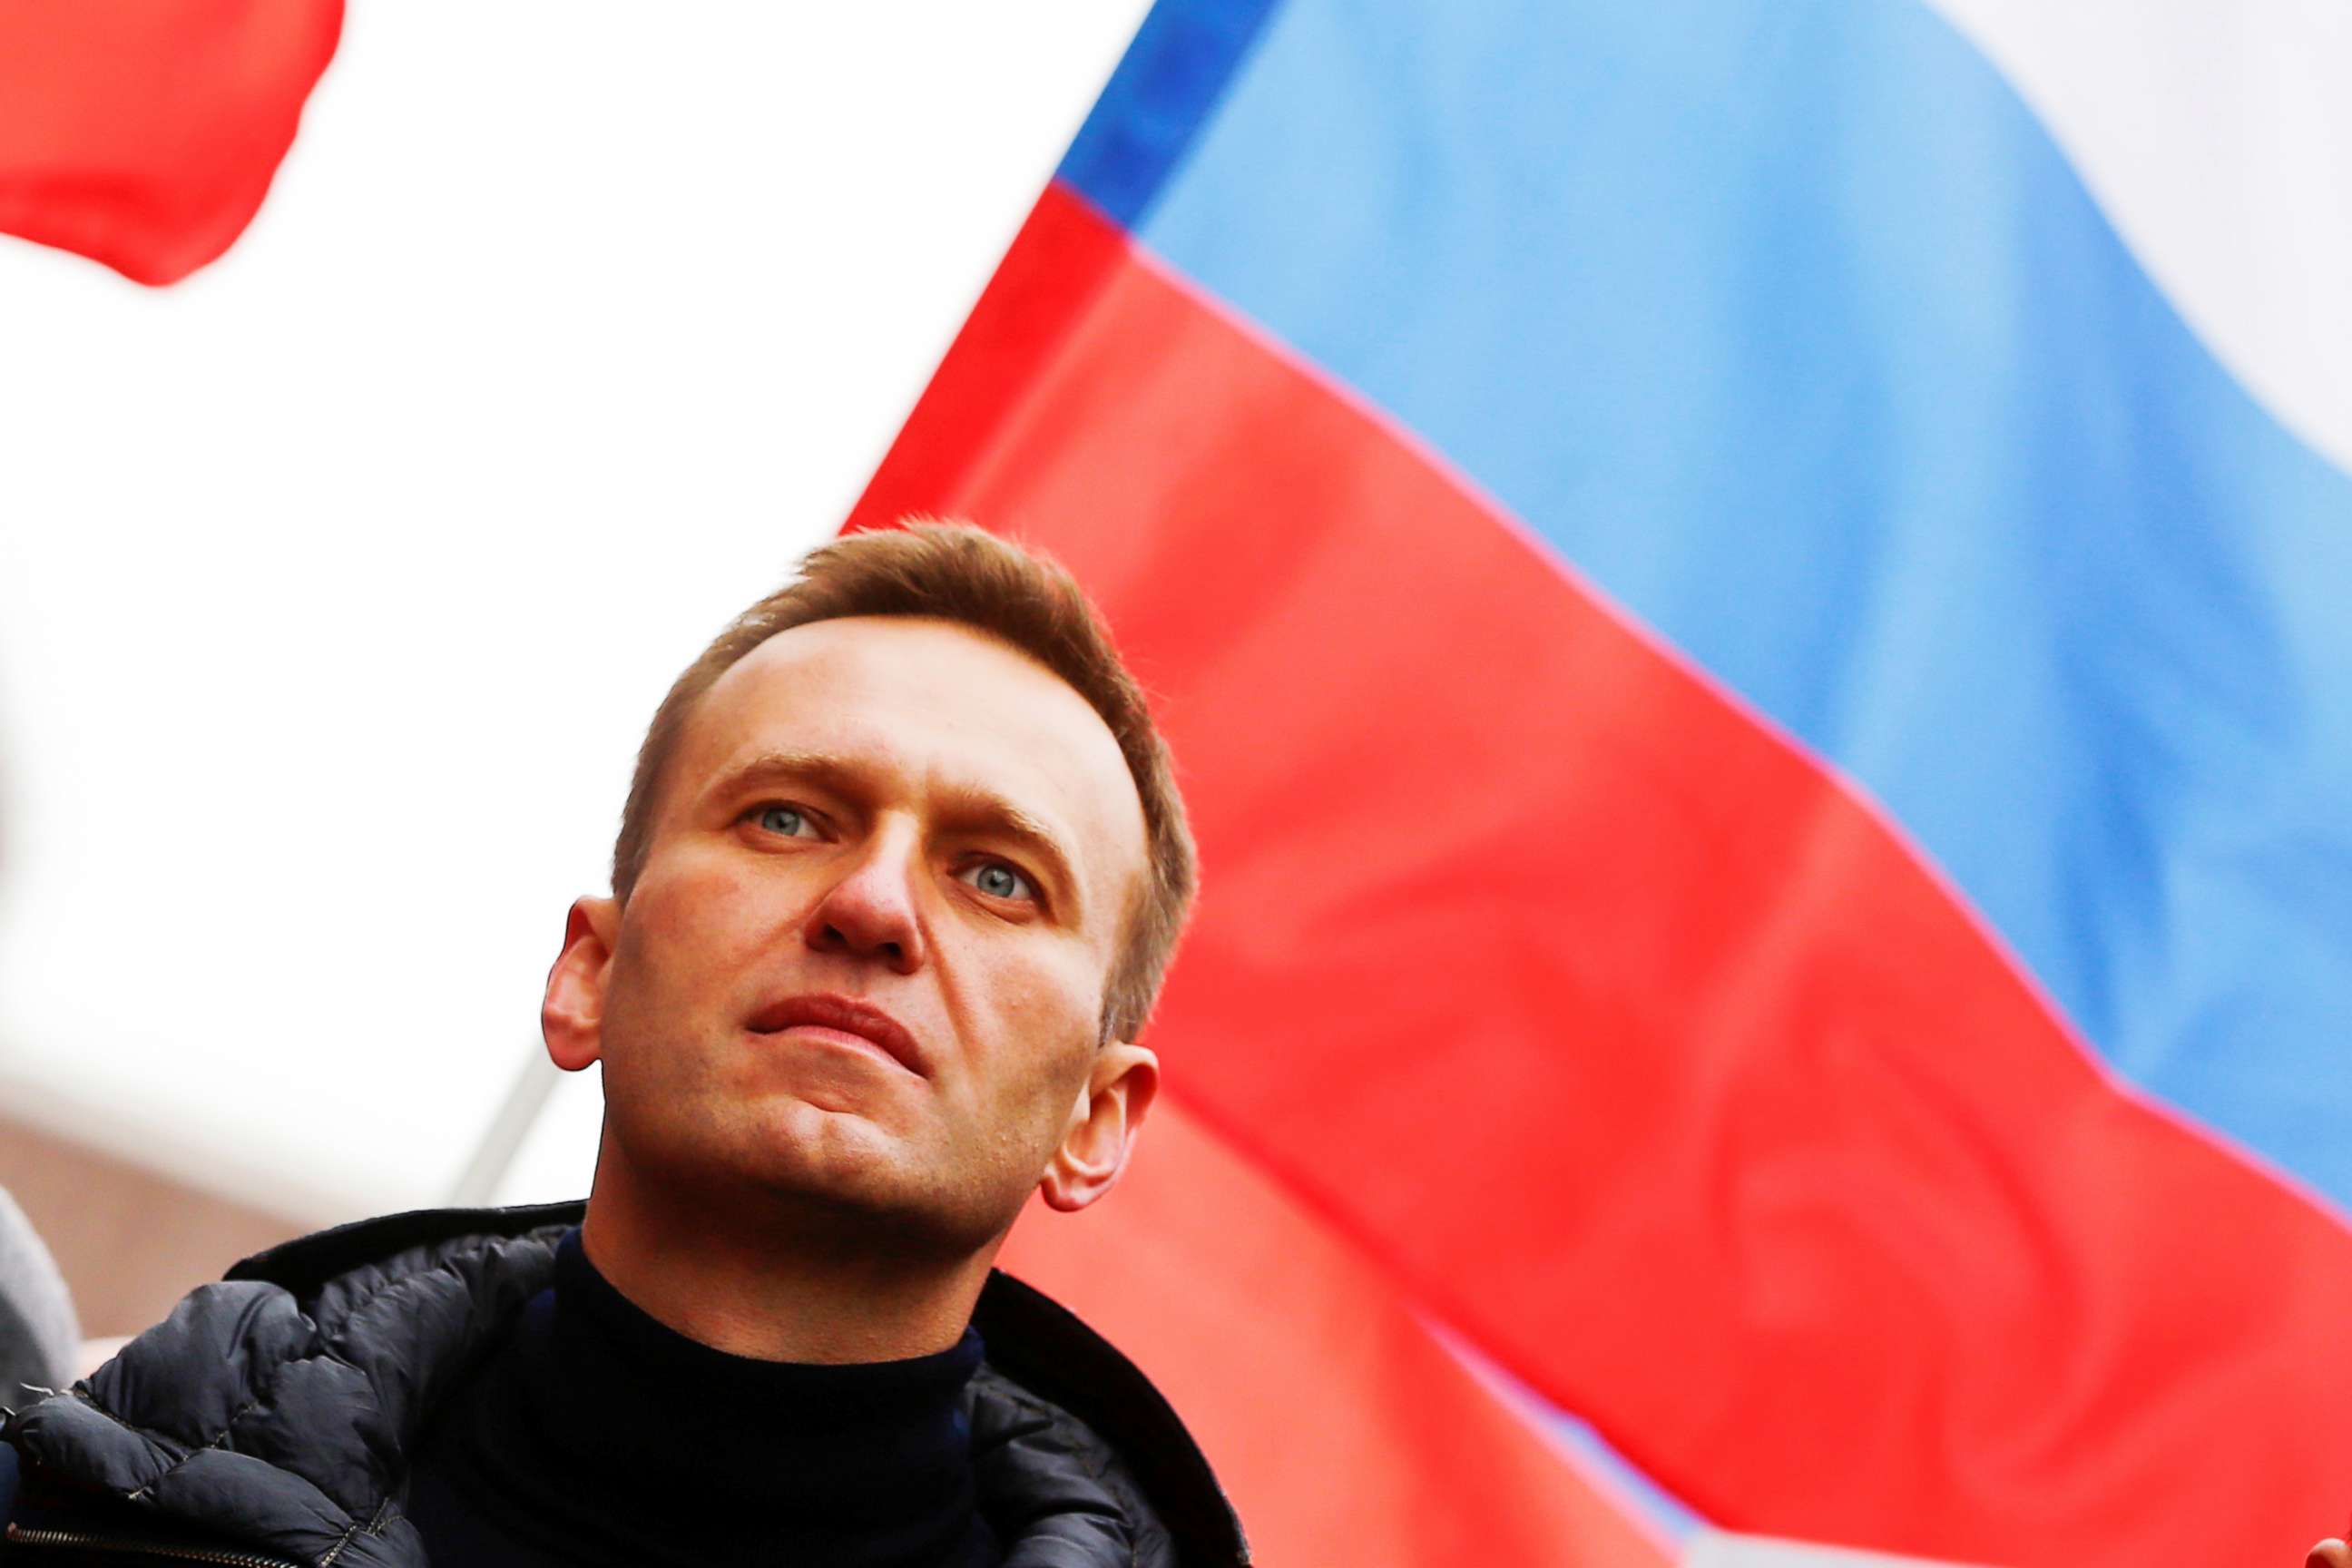 PHOTO: Russian opposition leader Alexei Navalny takes part in a march in Moscow, Feb. 24, 2019.